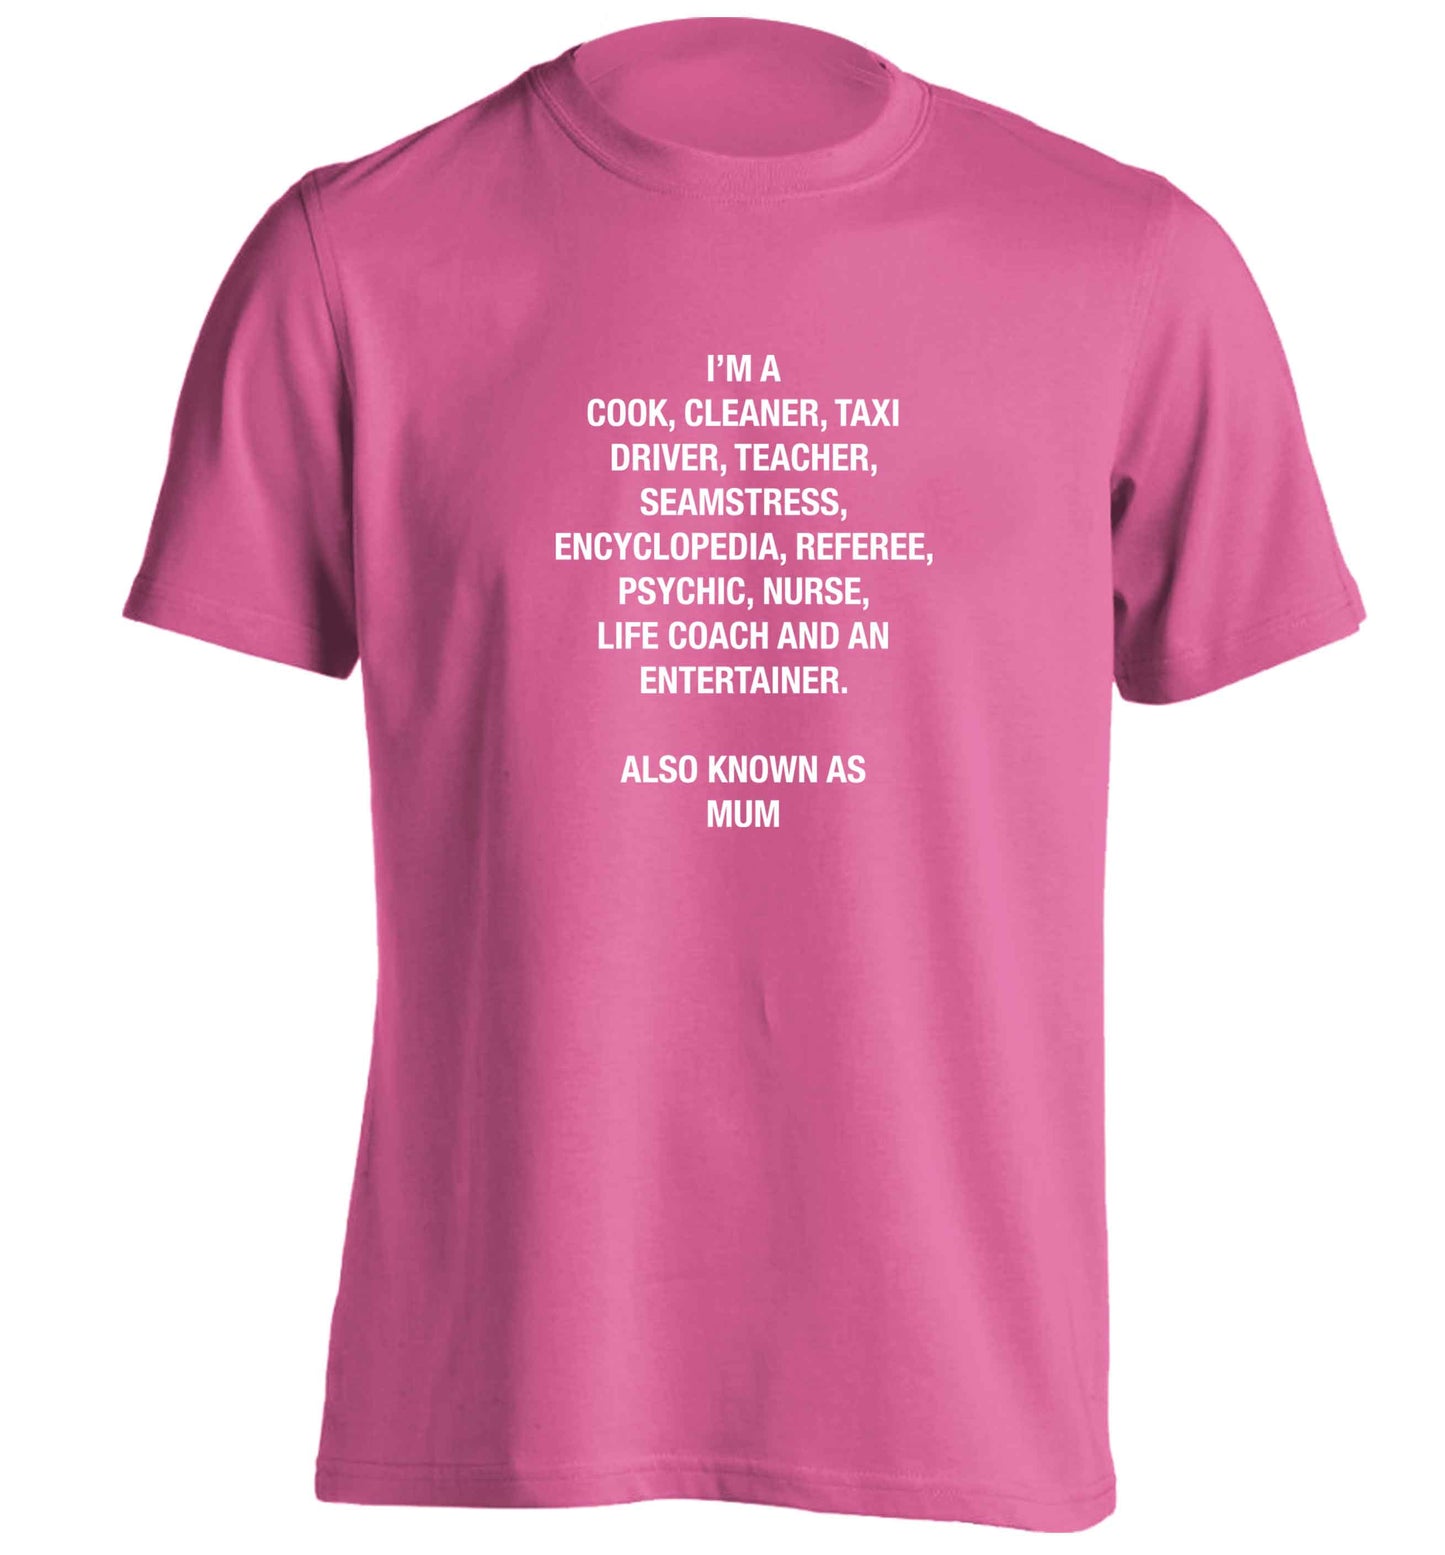 Funny gifts for your mum on mother's dayor her birthday! Mum, cook, cleaner, taxi driver, teacher, seamstress, encyclopedia, referee, psychic, nurse, life coach and entertainer adults unisex pink Tshirt 2XL